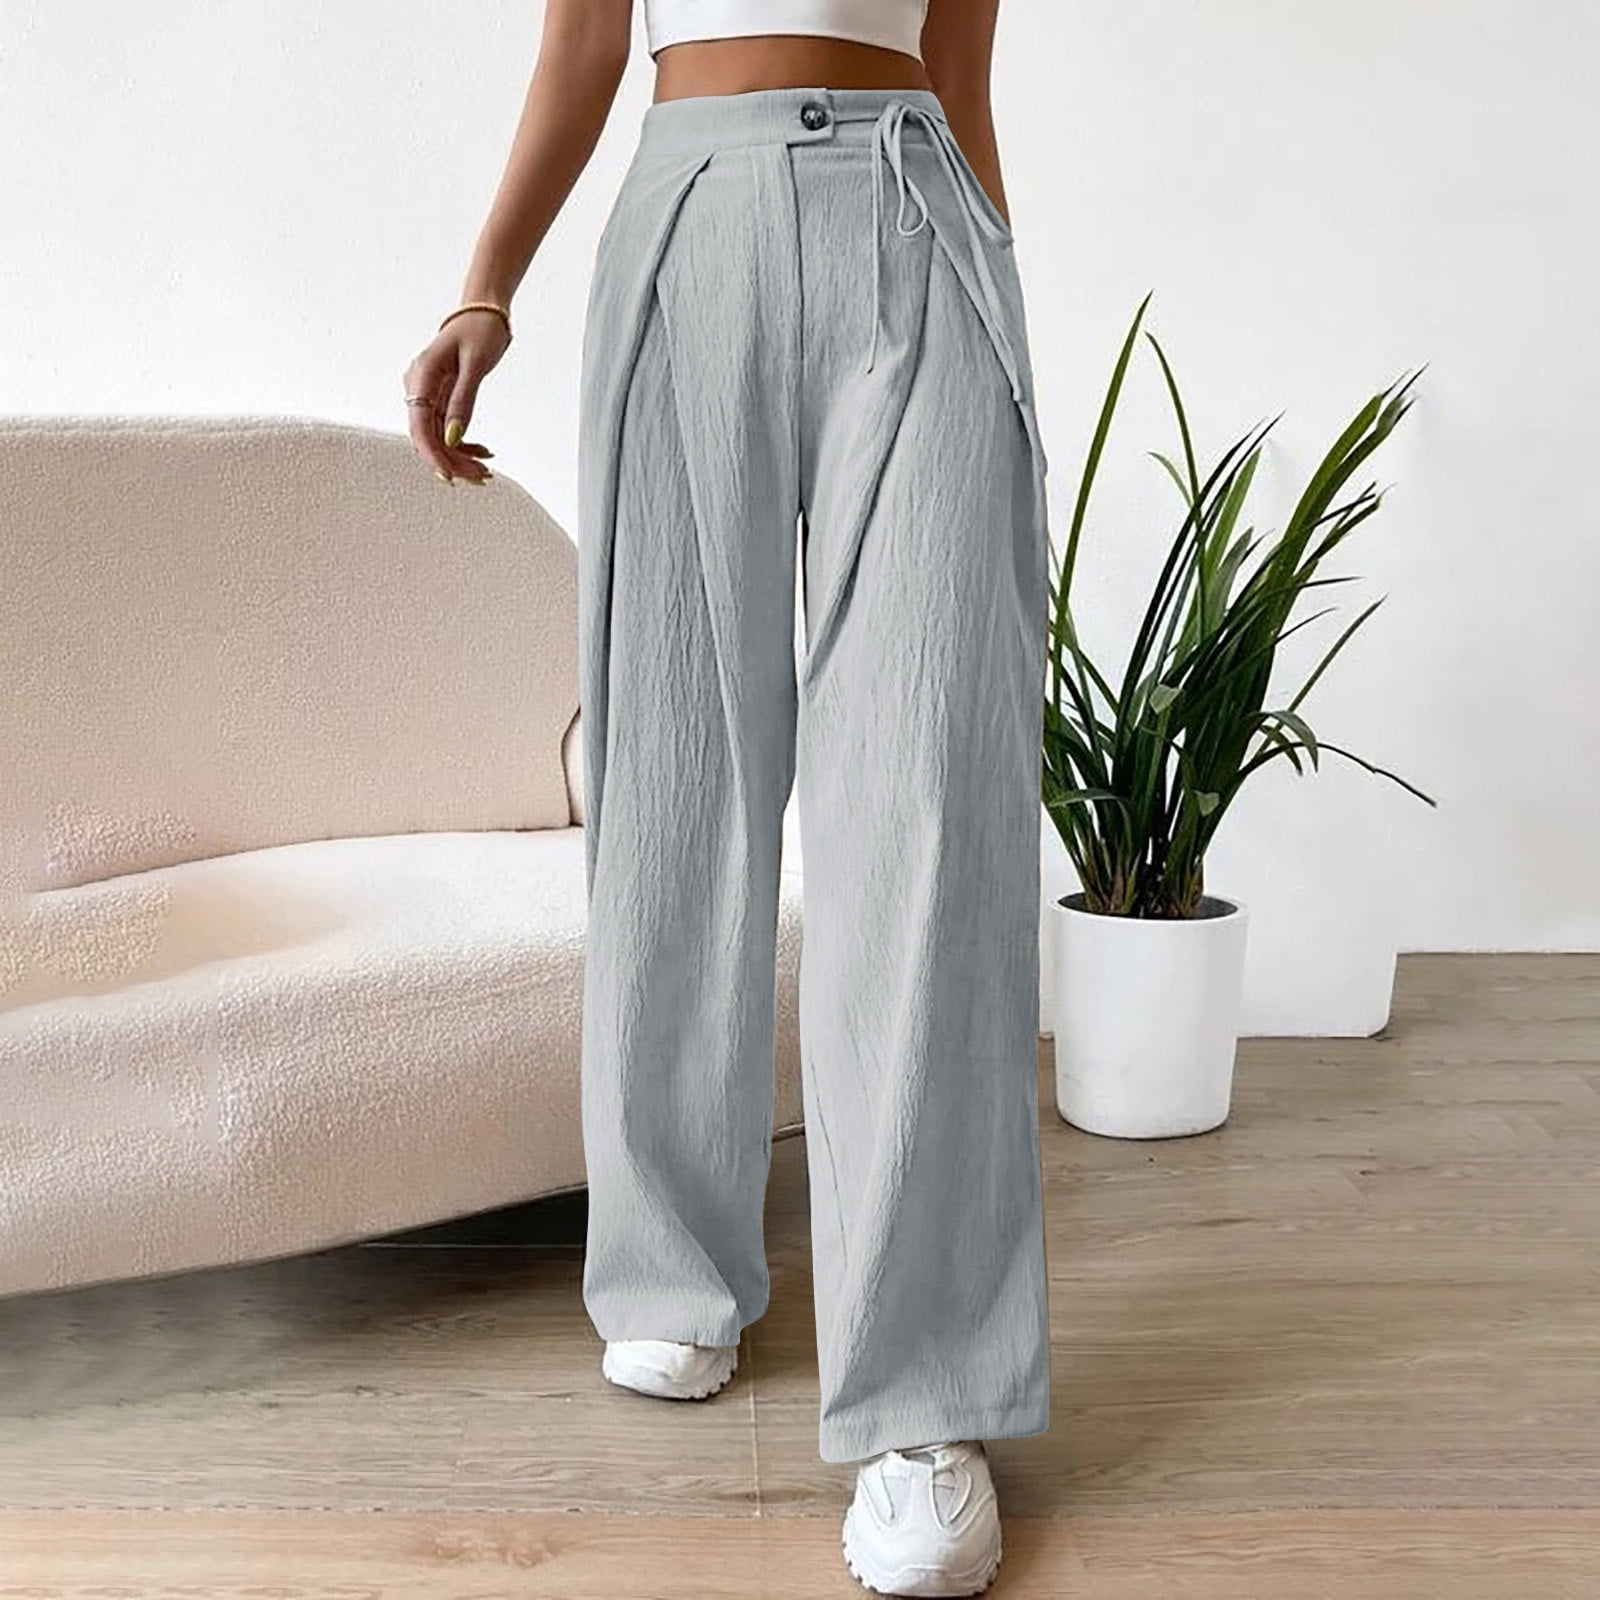 Buy Women's Summer Casual Cotton Linen Elastic Waist Pants Daily Fashion Comfy  Pants at affordable prices — free shipping, real reviews with photos — Joom